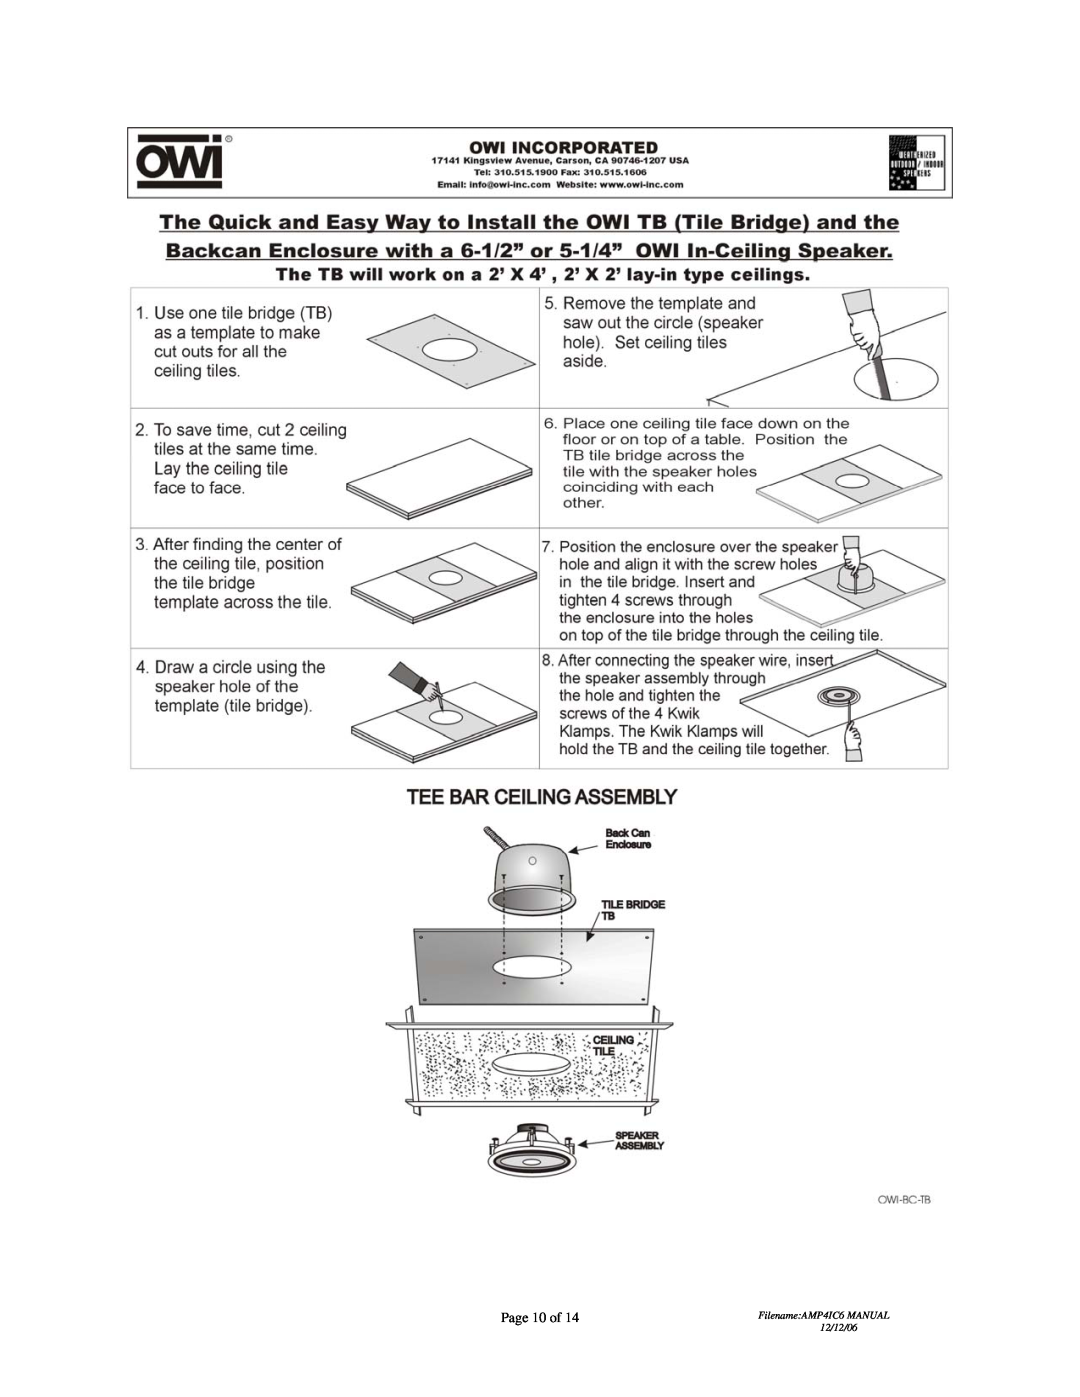 OWI installation instructions Page 10 of, Filename AMP4IC6 MANUAL, 12/12/06 